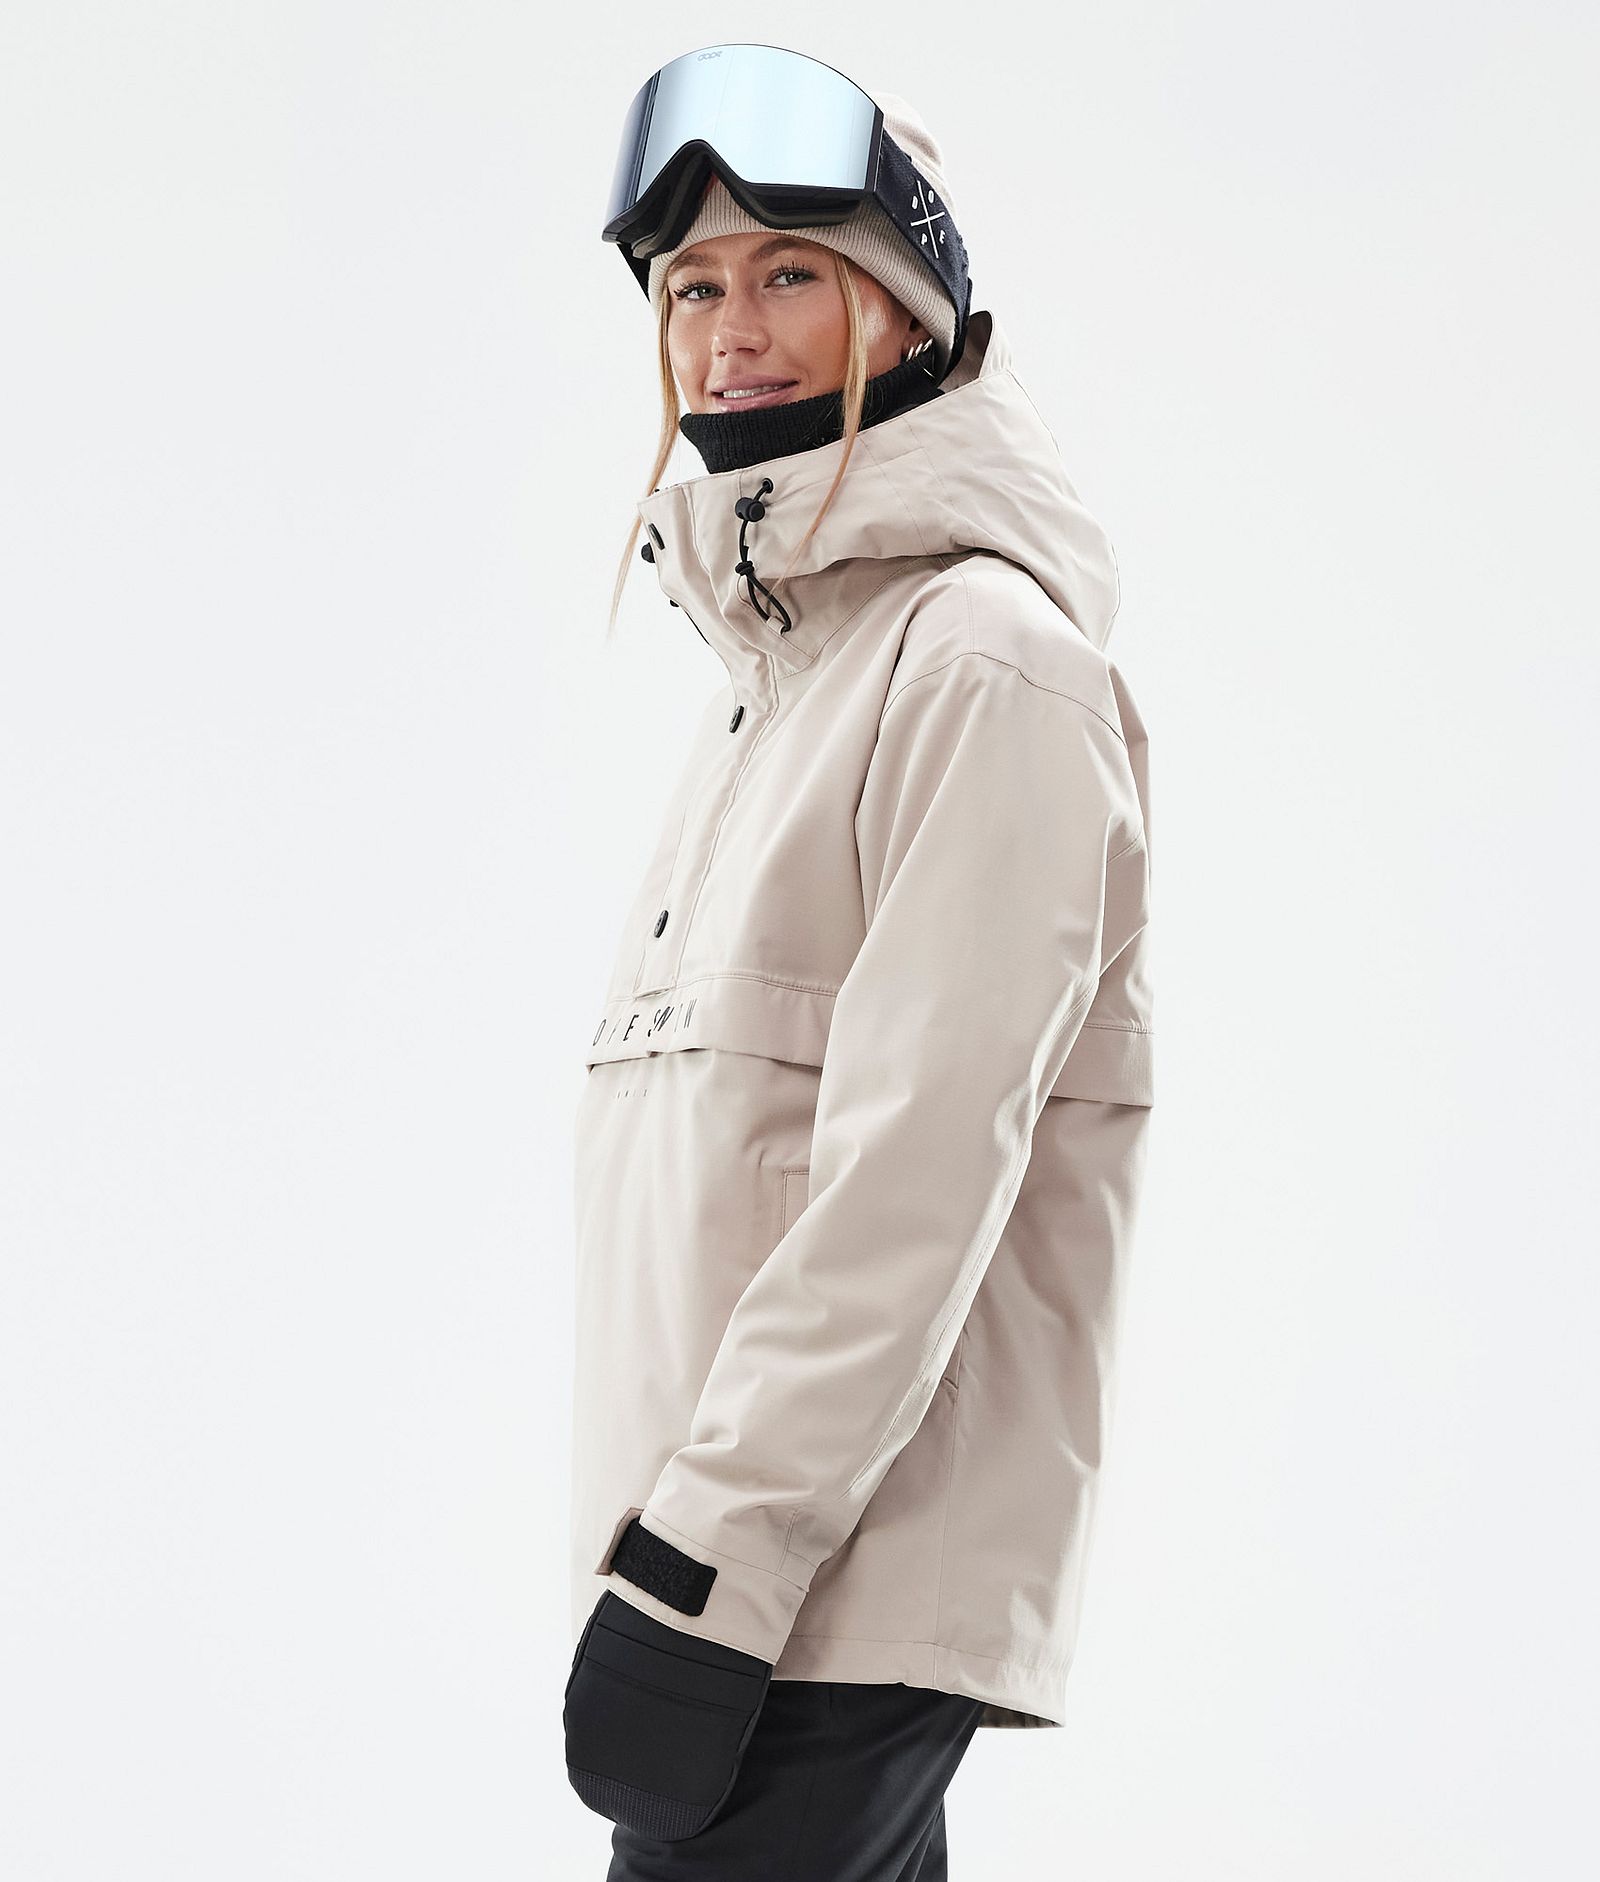 Dope Snow - Ready to gear up for winter? Hot drops and